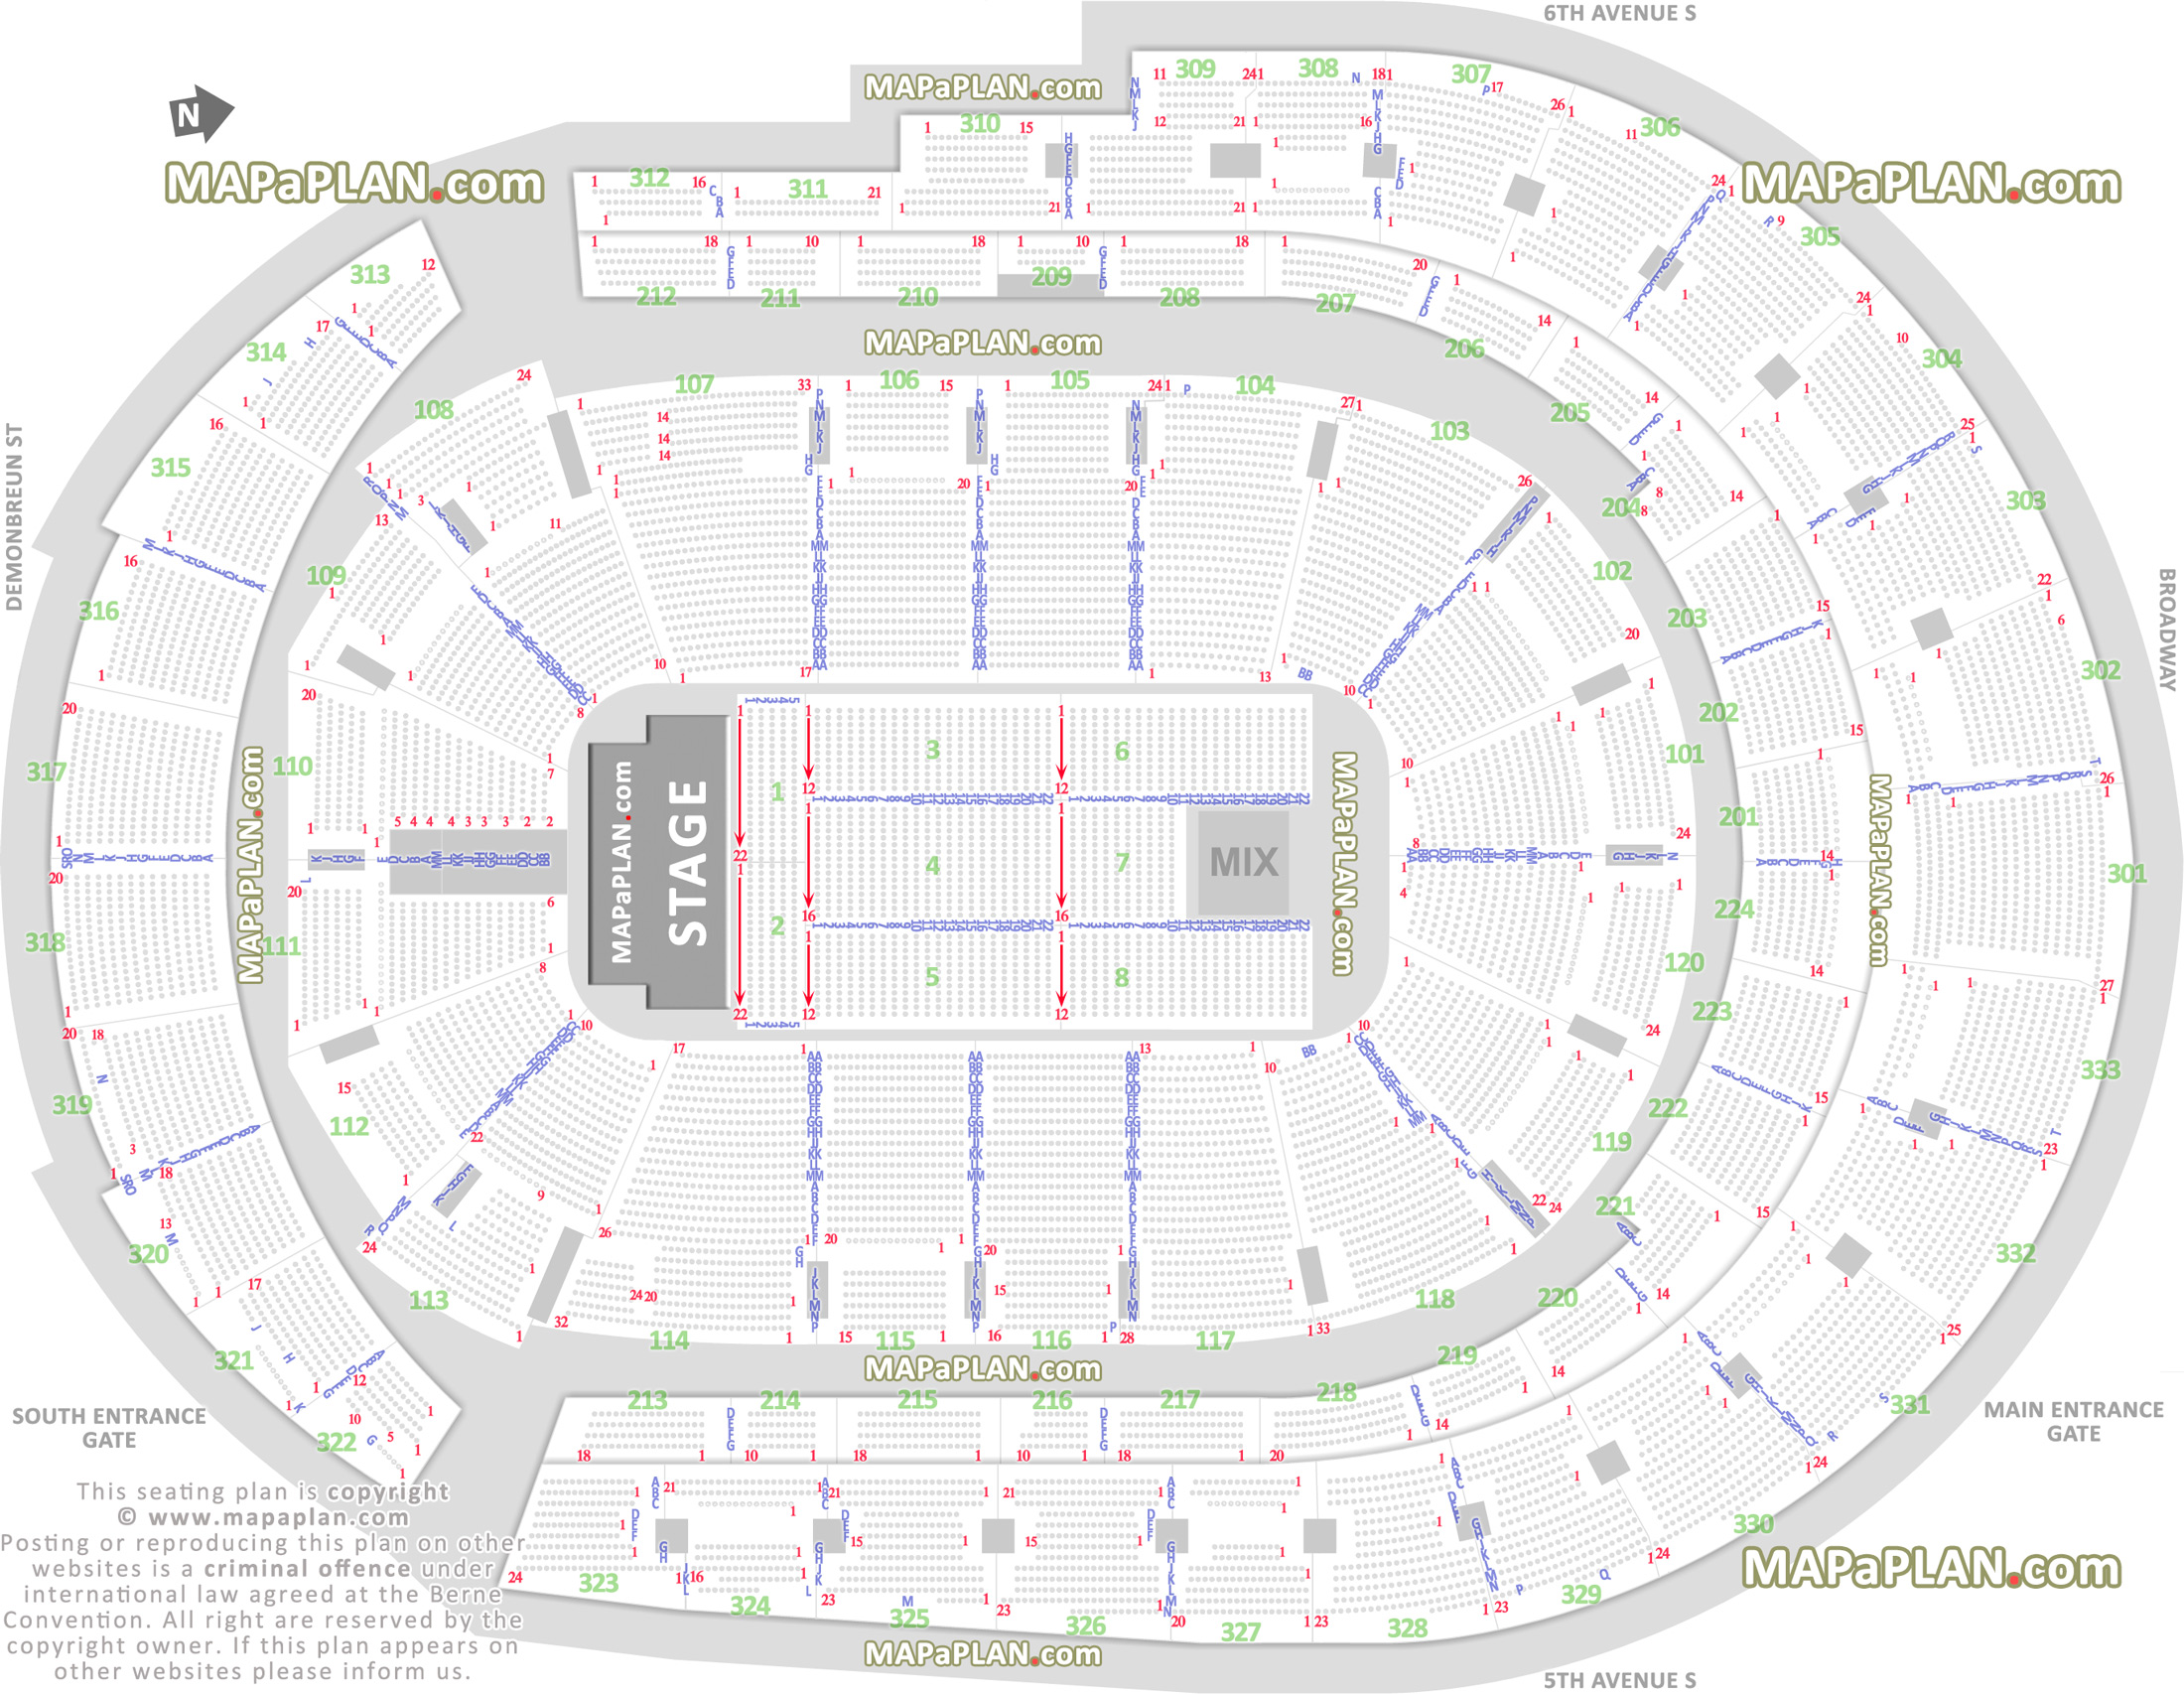 detailed seat row numbers end stage concert sections floor plan map arena lower club upper bowl level layout Nashville Bridgestone Arena seating chart